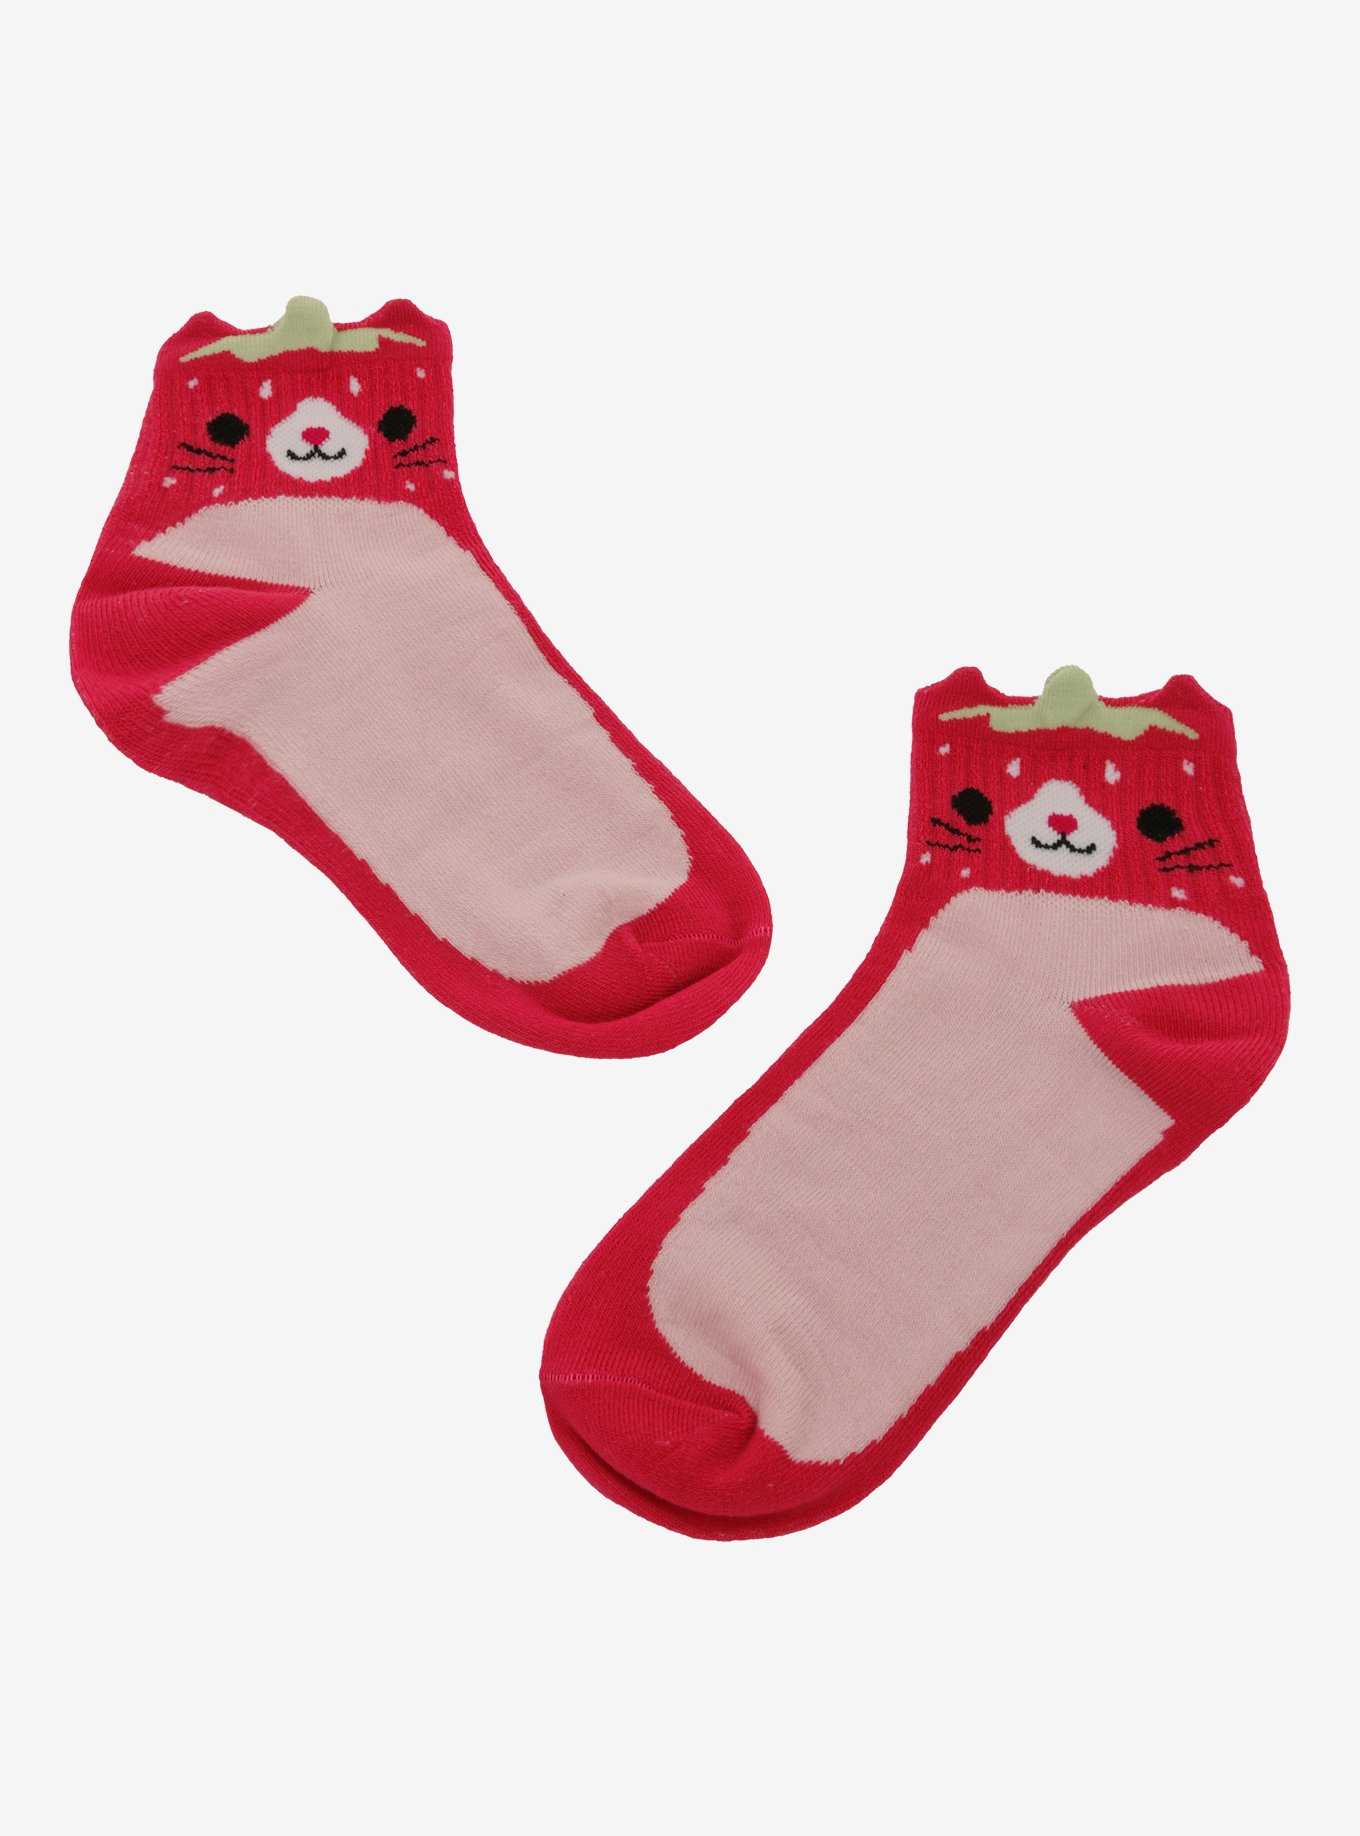 Kitty Berry Figural Ankle Socks, , hi-res